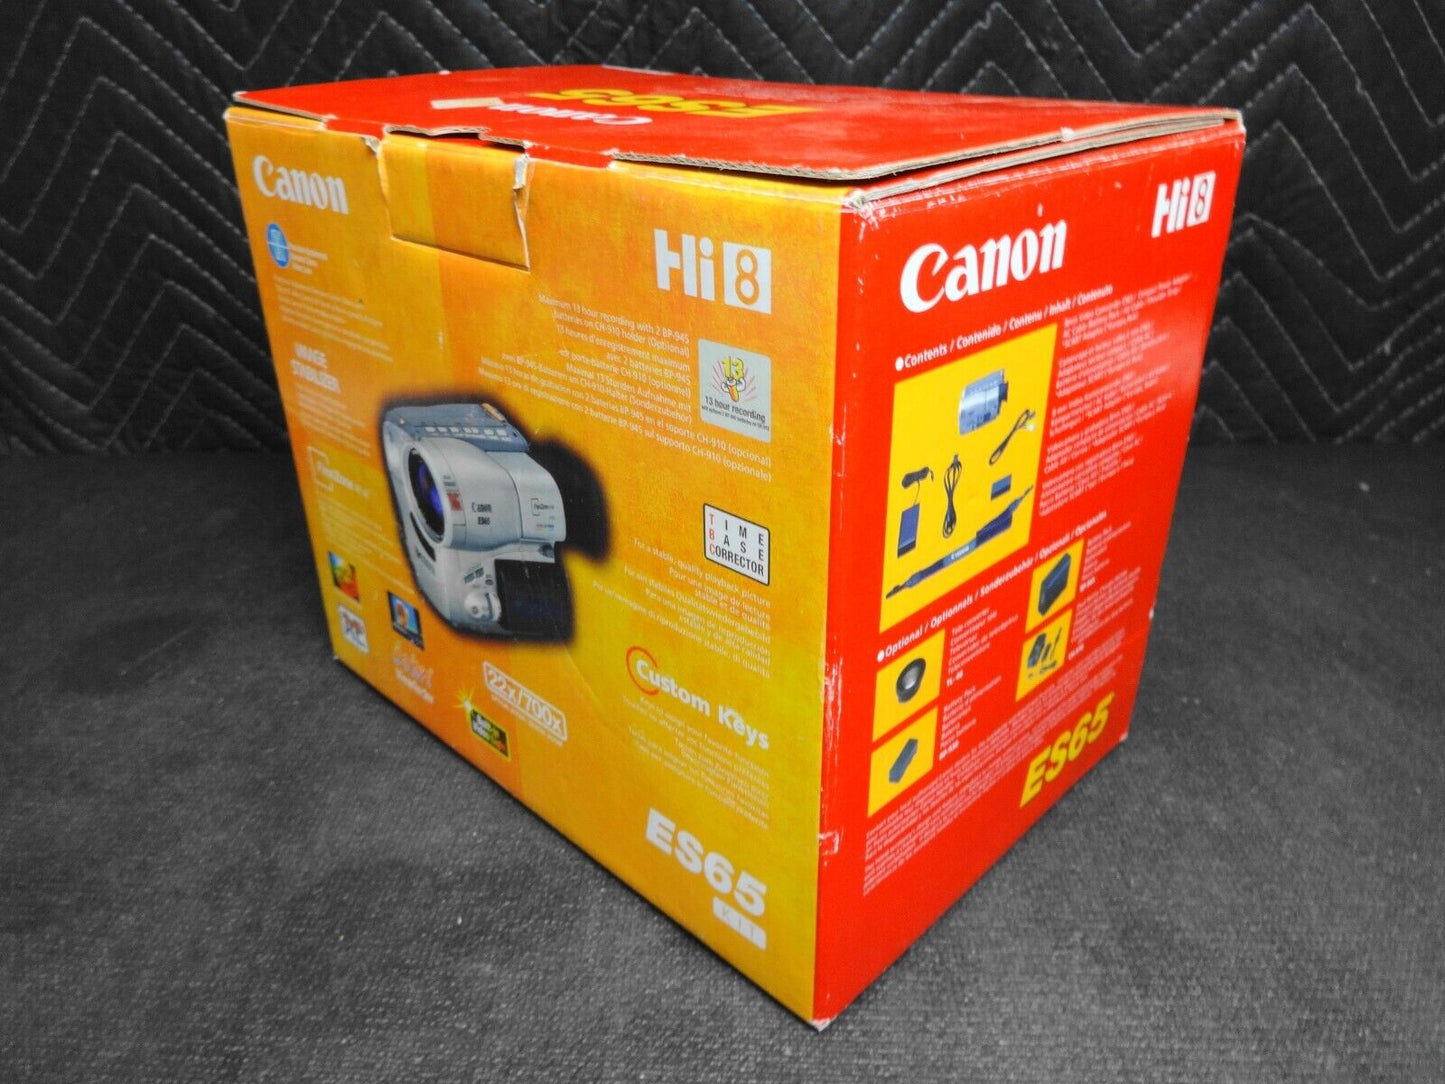 Canon ES65 HI-8 Camcorder - Great for Transfer! Watch Record Transfer Hi8